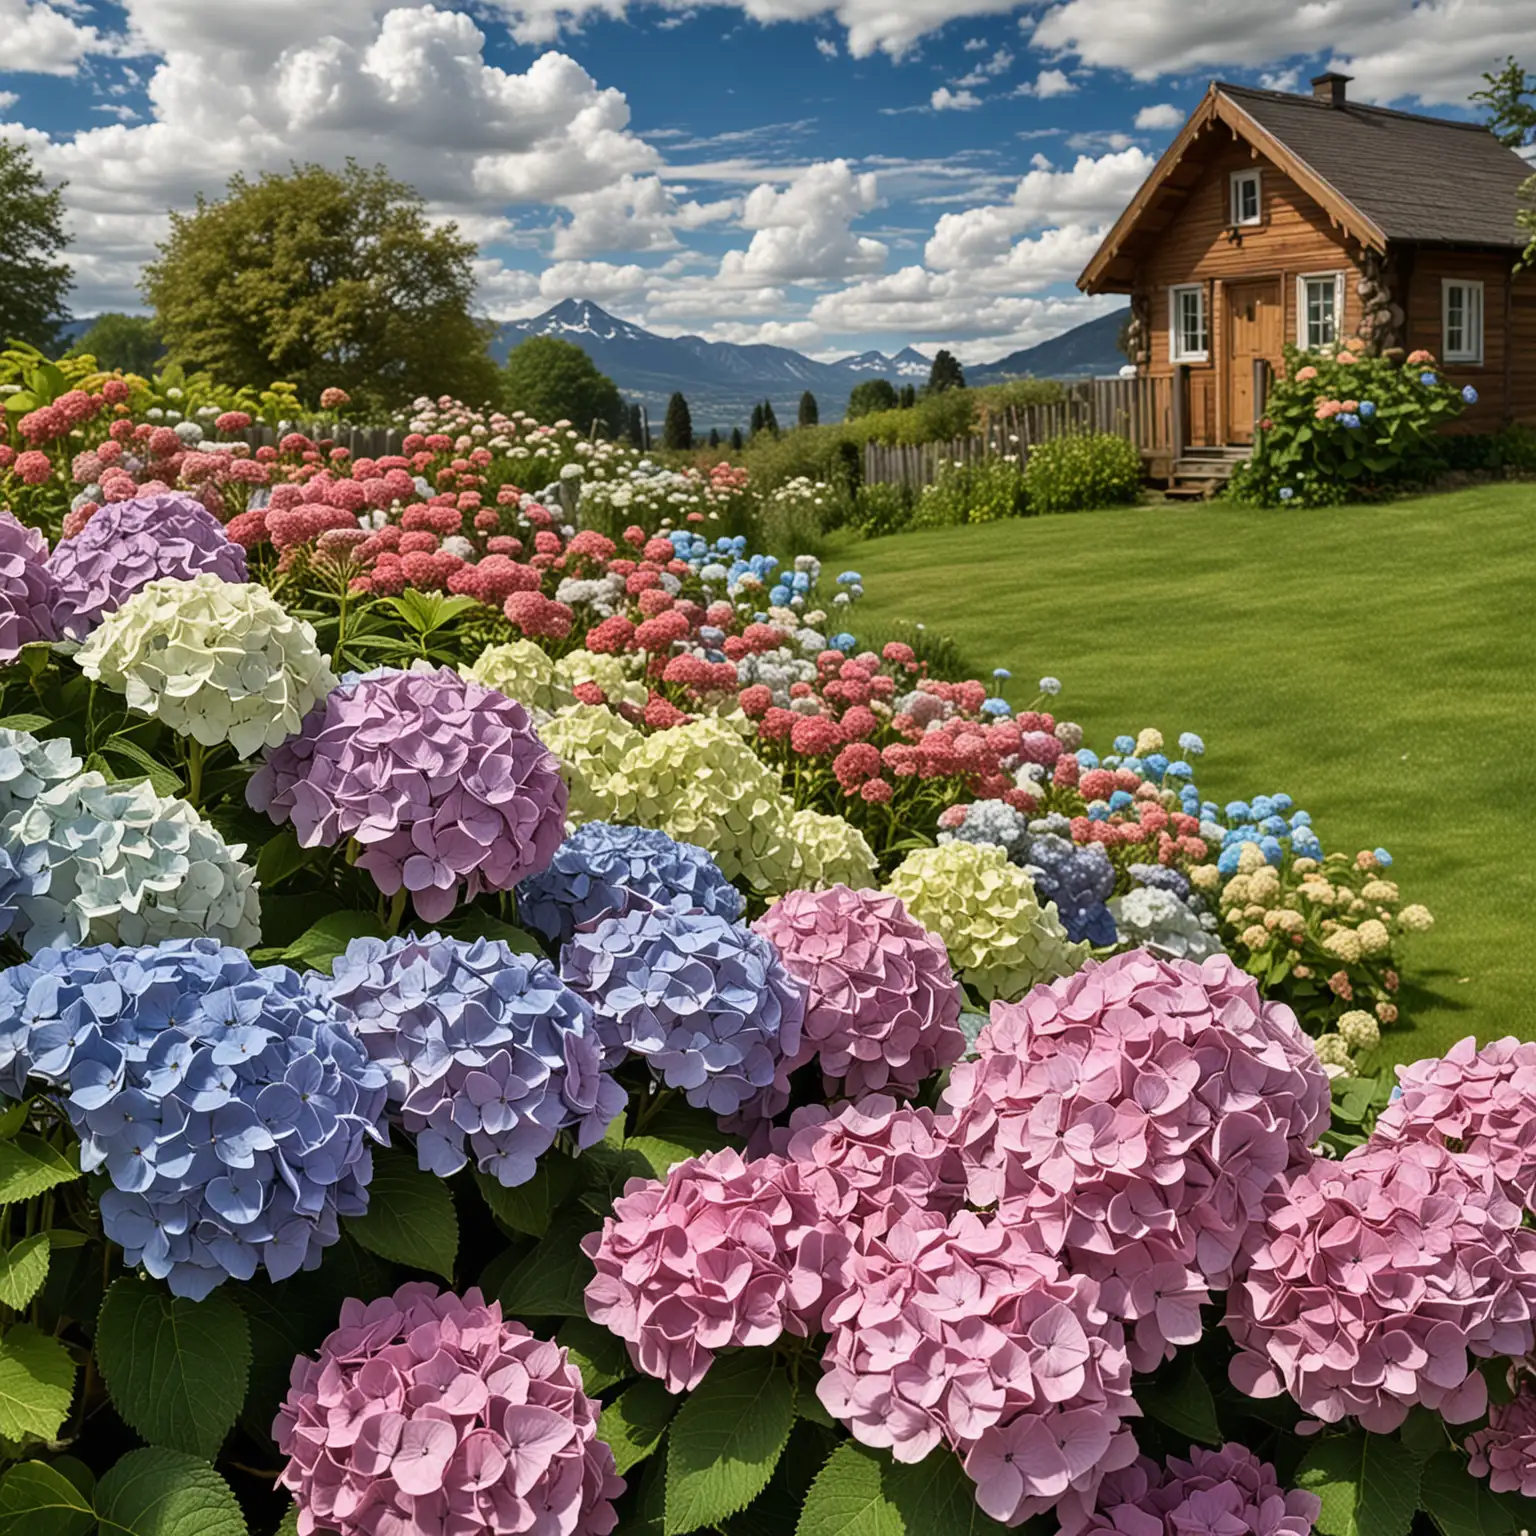 Hydrangea-Macrophylla-Endless-Summer-Field-with-Wooden-House